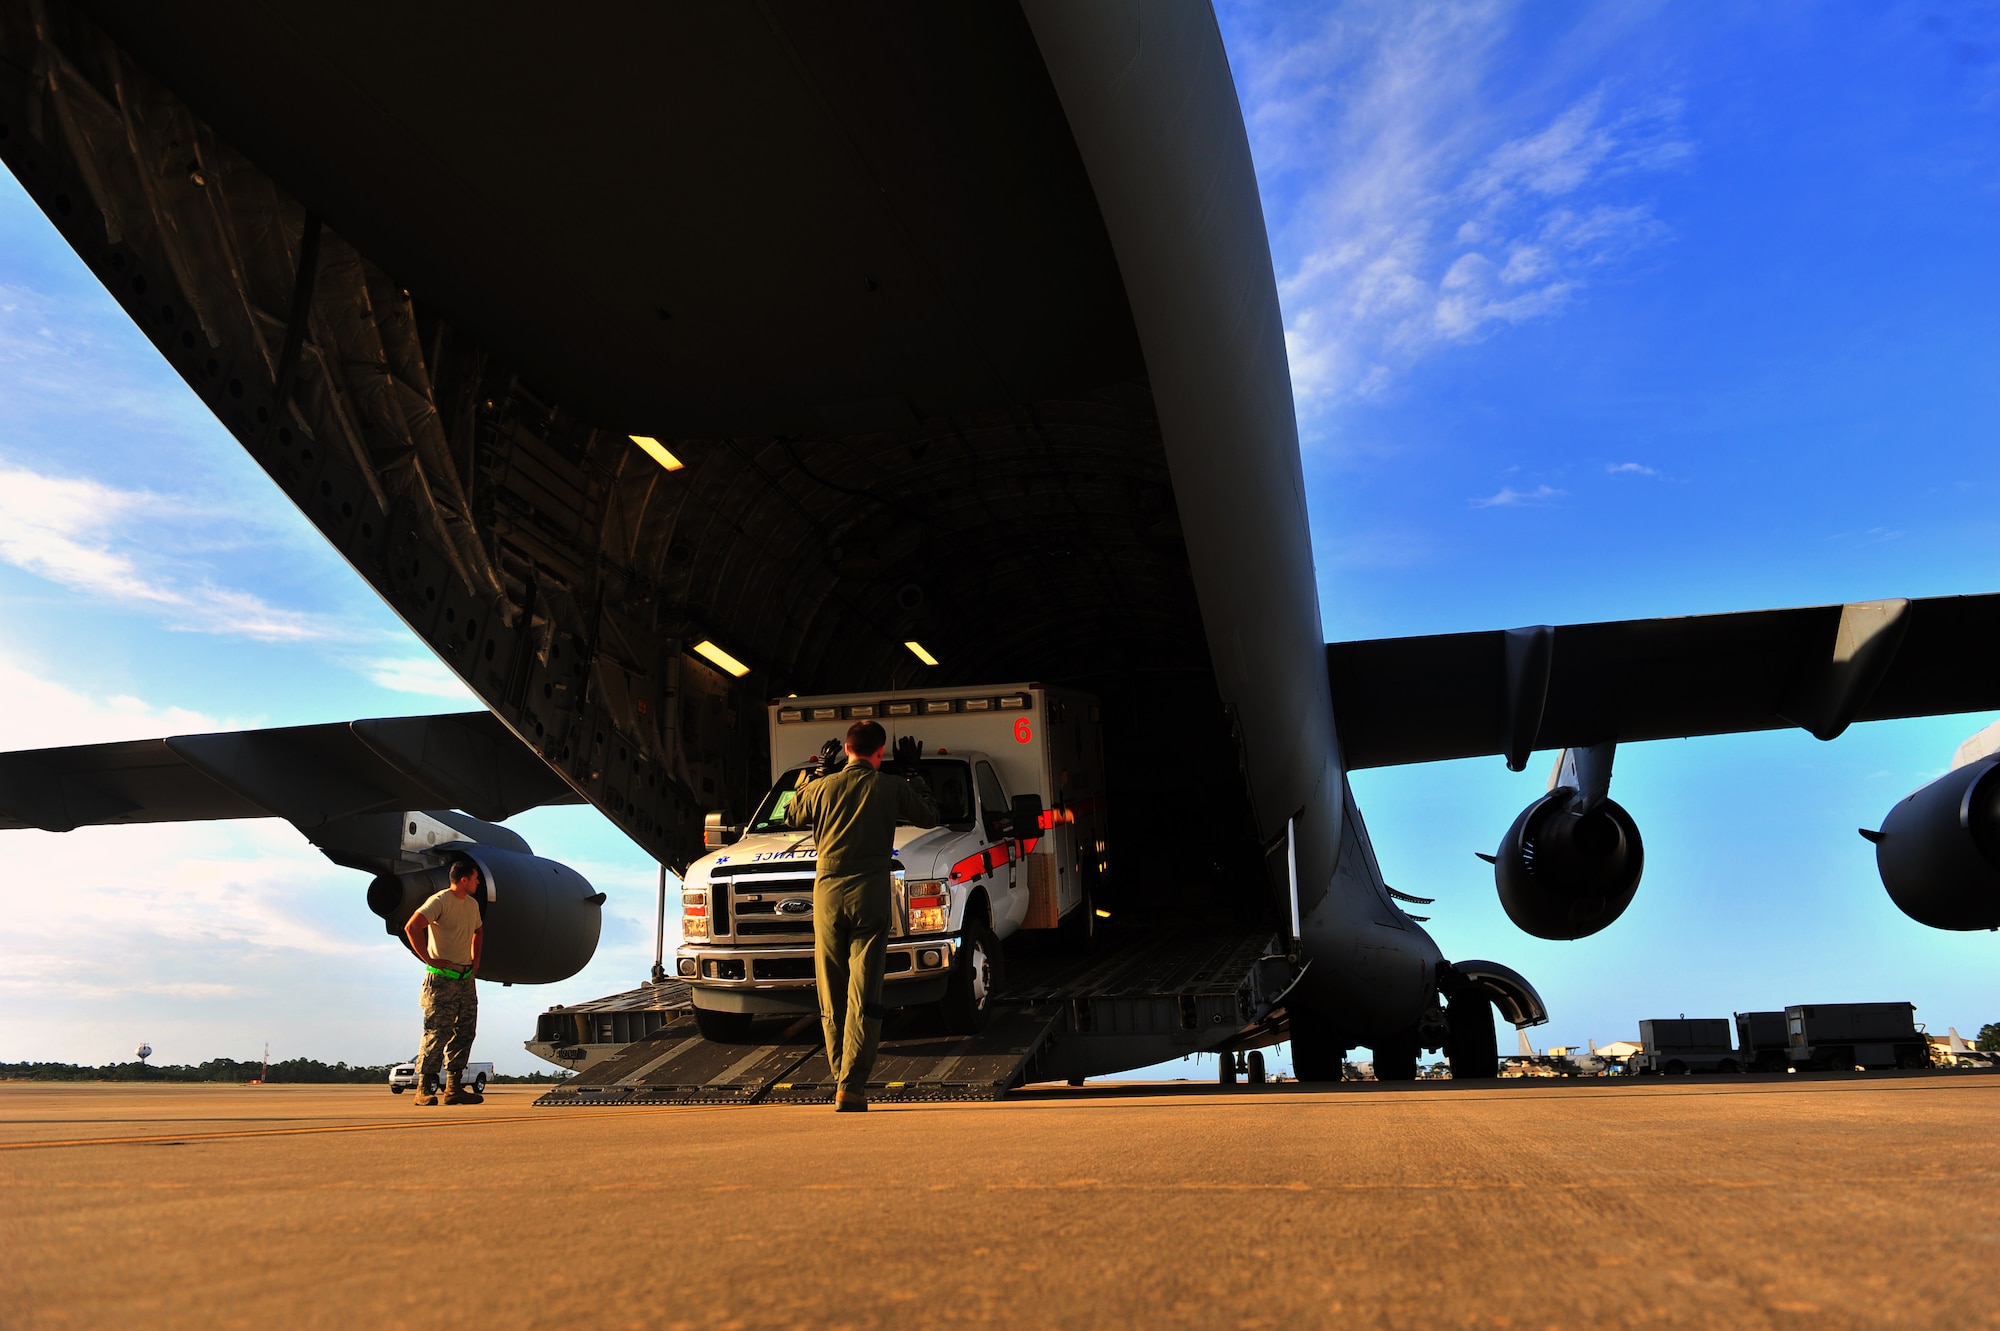 Tech. Sgt. Eric Blevins, 316th Airlift Squadron loadmaster, marshals an ambulance onto a C-17 Globemaster, May 27, 2015, at Hurlburt Field, Fla. The C-17, loaded with 823rd RED HORSE members and medical vehicles, took off in support of NEW HORIZONS 2015, an annual event conducted to train military civil engineers and medical professionals to deploy and conduct joint operations. (U.S. Air Force photo by Airman 1st Class Ryan Conroy/Released)  